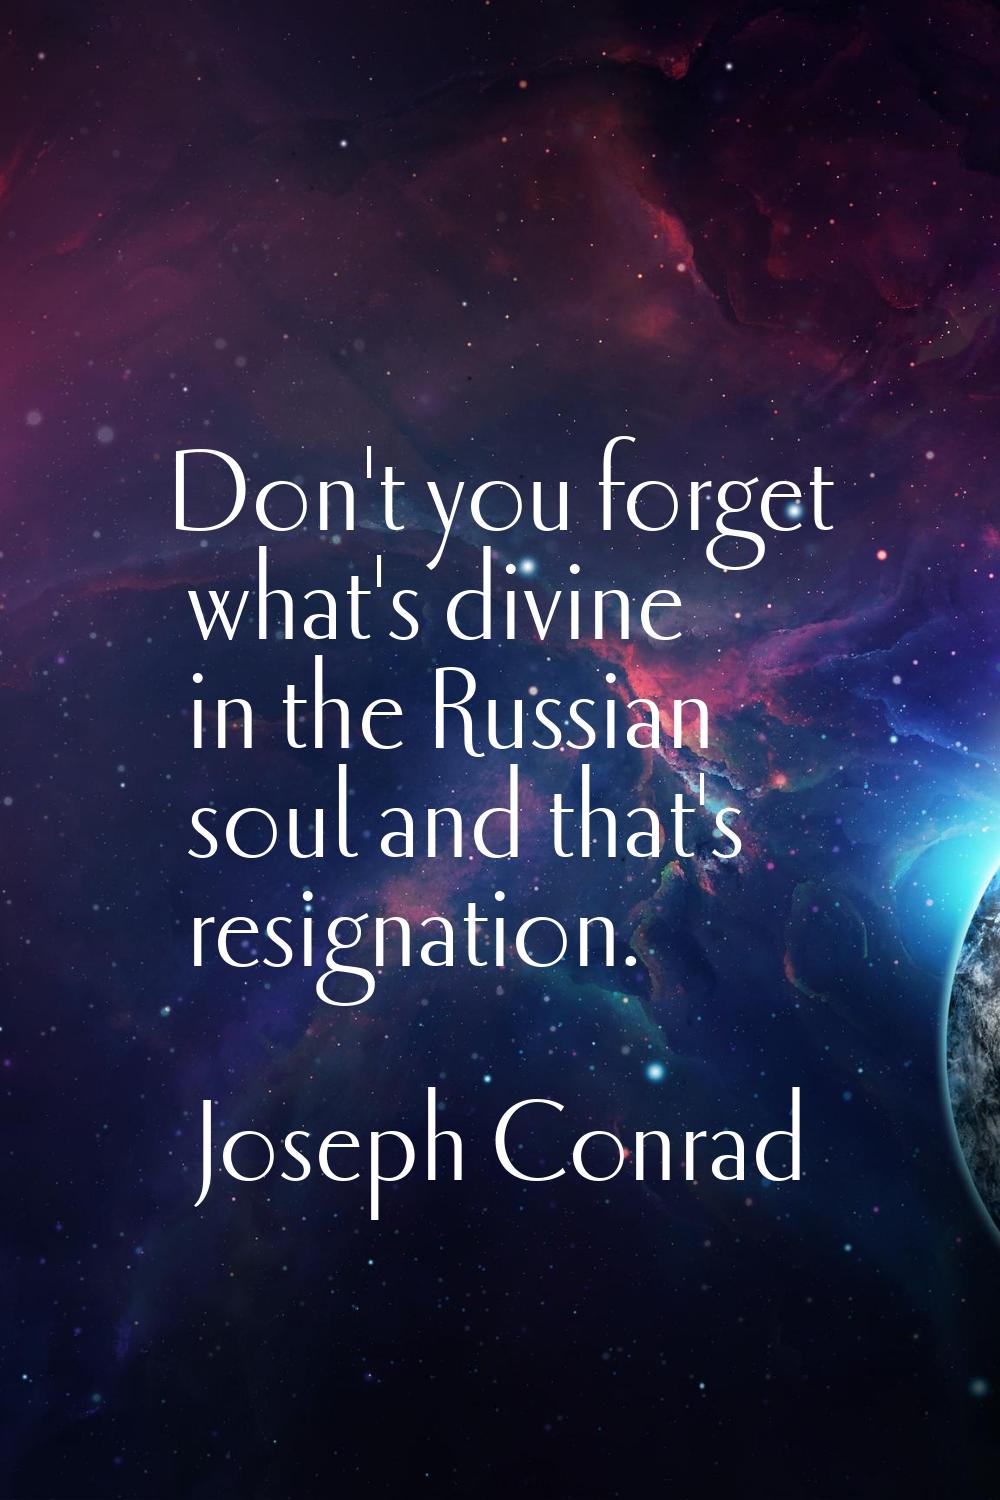 Don't you forget what's divine in the Russian soul and that's resignation.